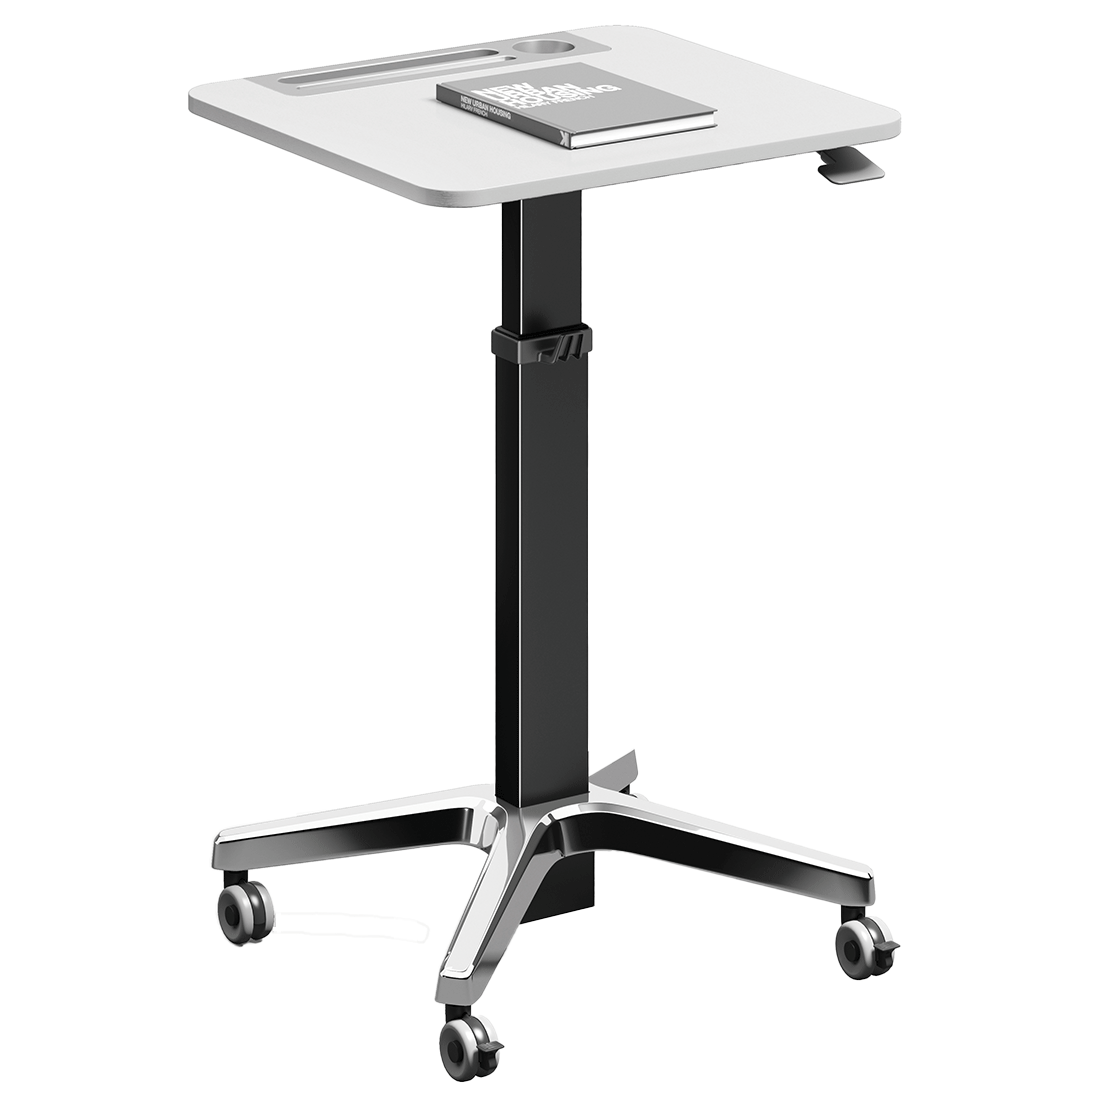 Rossi Height Adjustable Gas Lift Table Frame - switchoffice.com.au